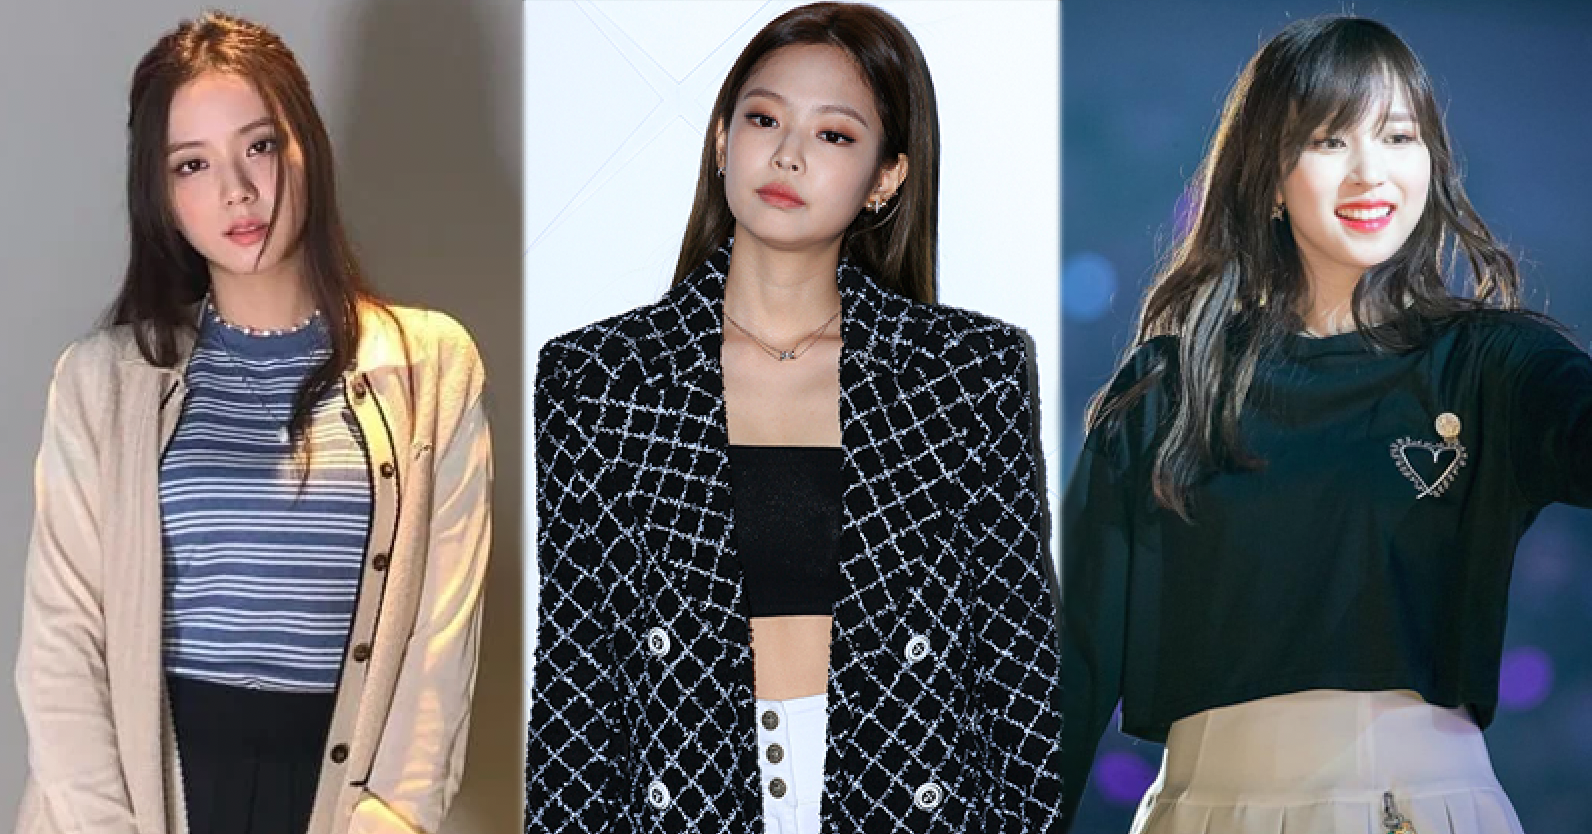 Who Is The Female Idol People Want to See on Reality Shows Most?